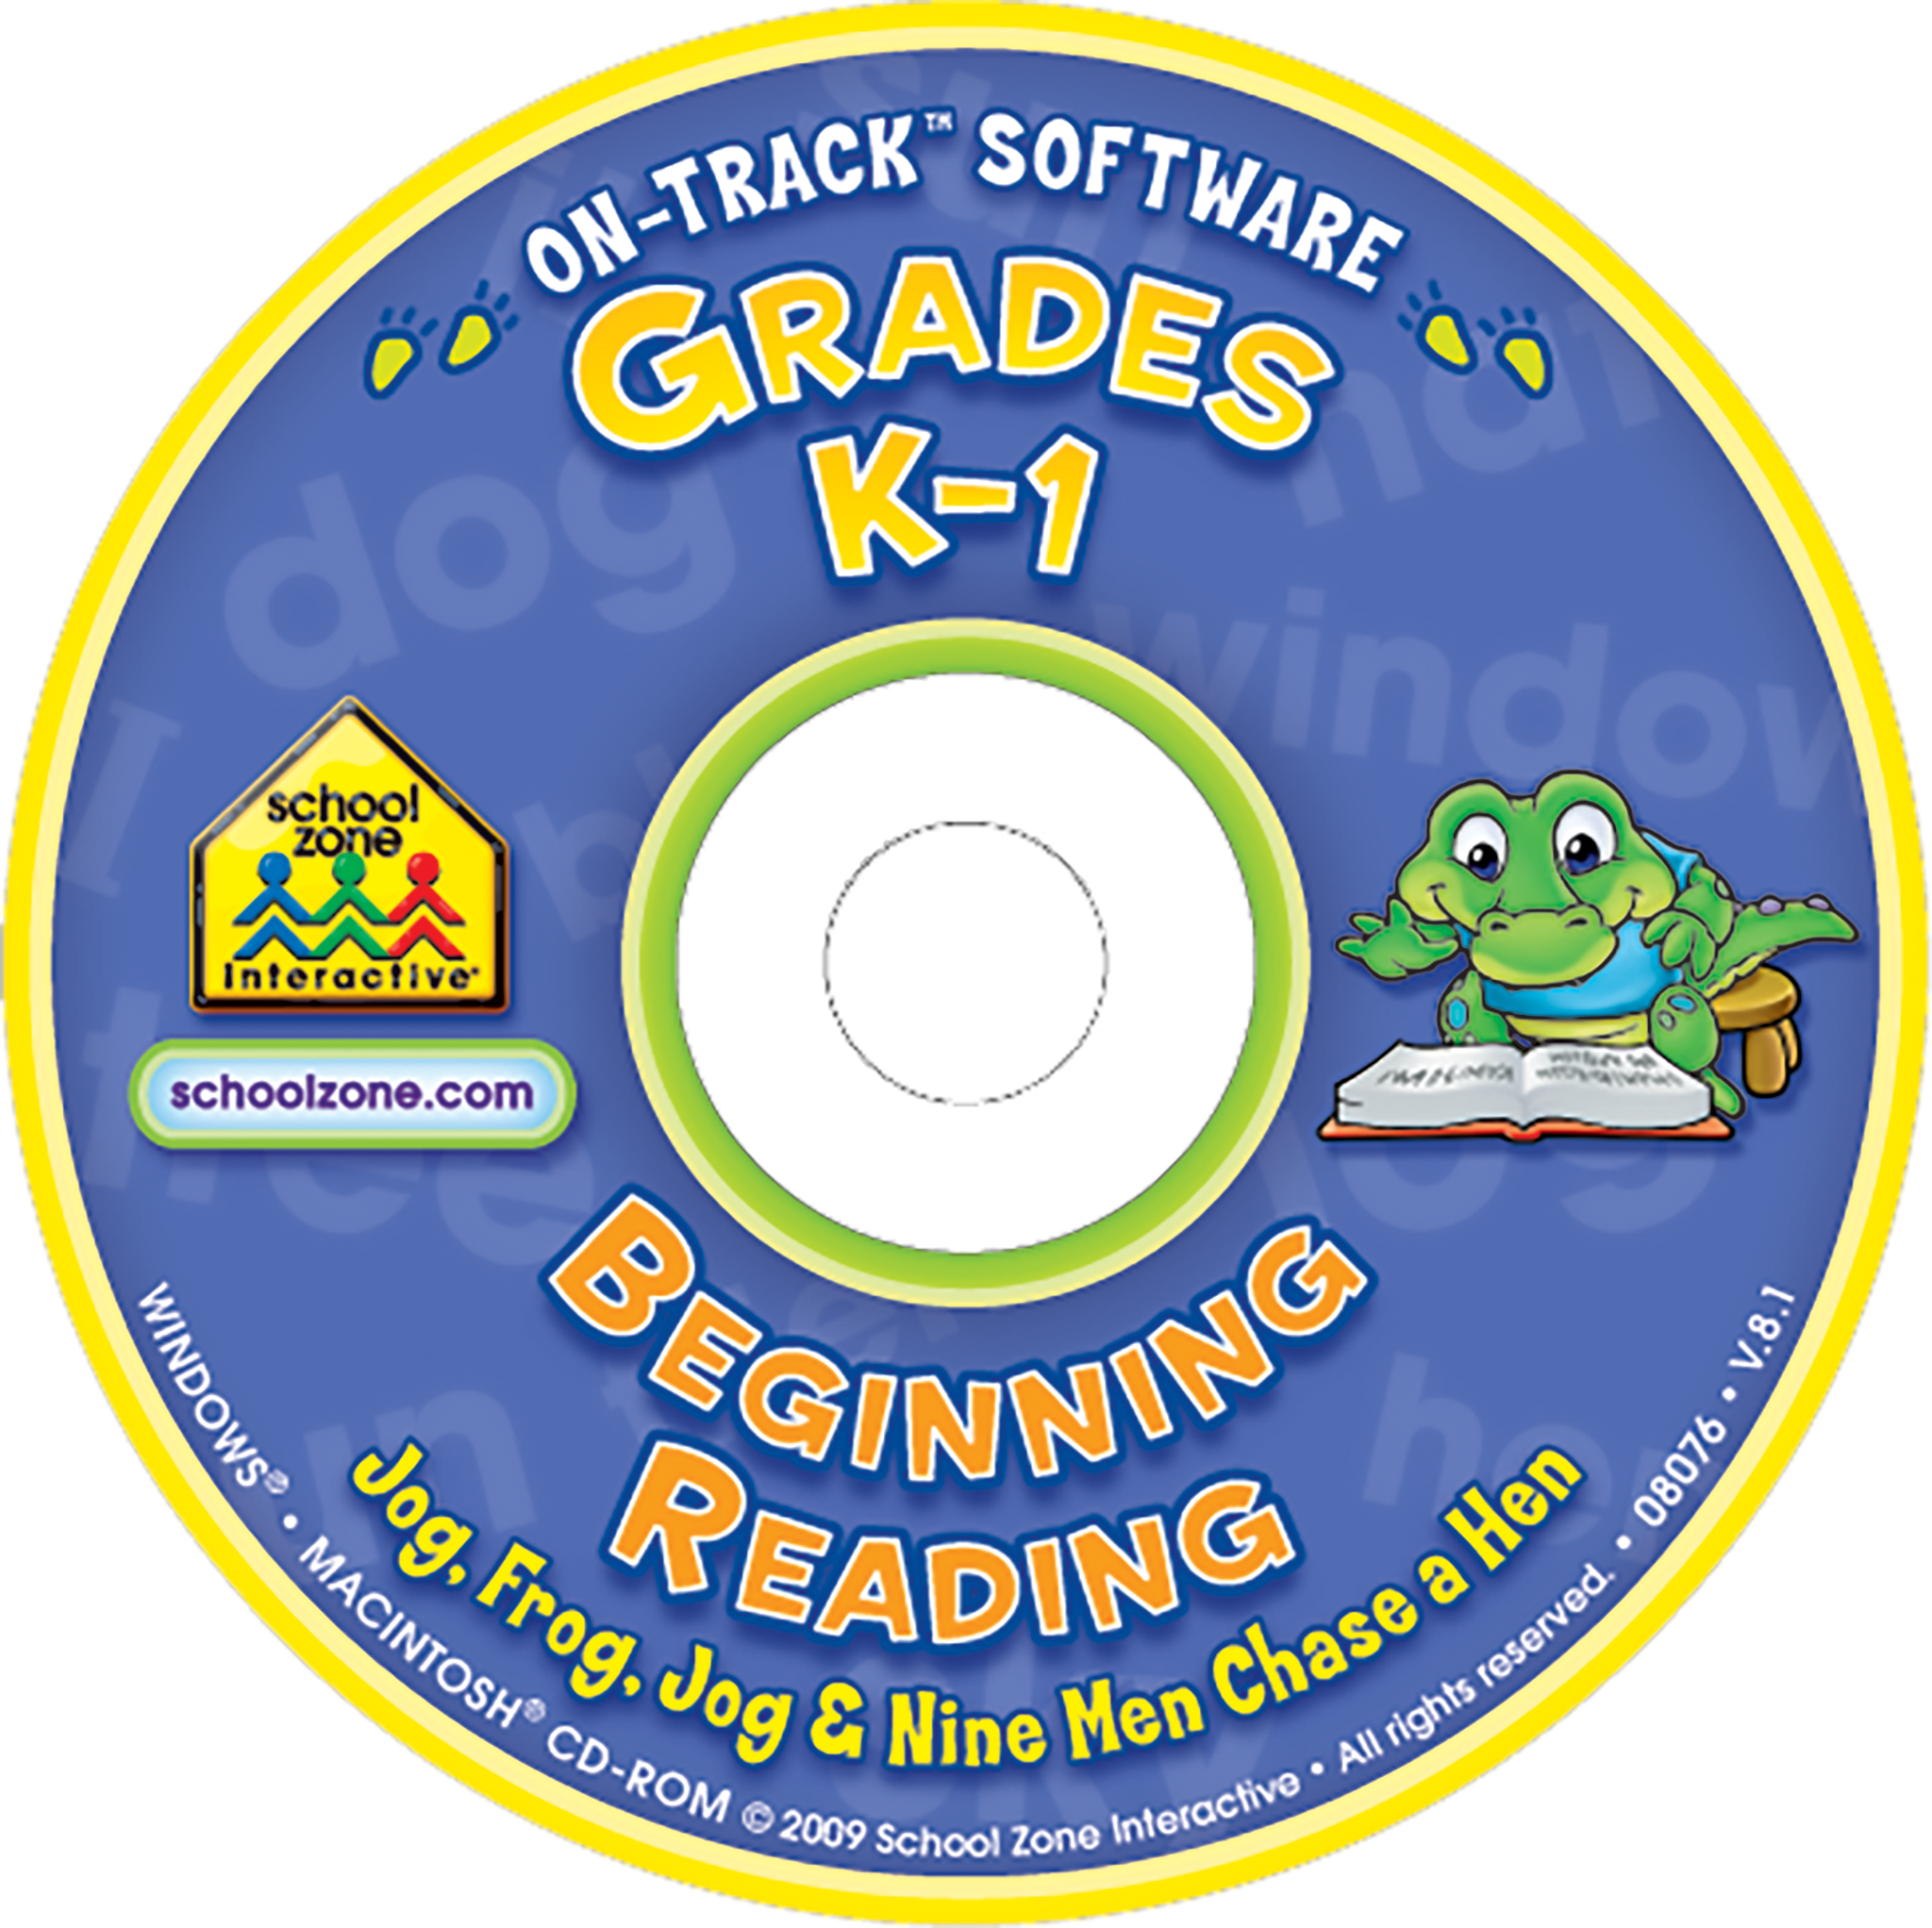 Beginning Reading On-track Software Makes Learning - Beginning Reading K-1 [book] (2048x2044)